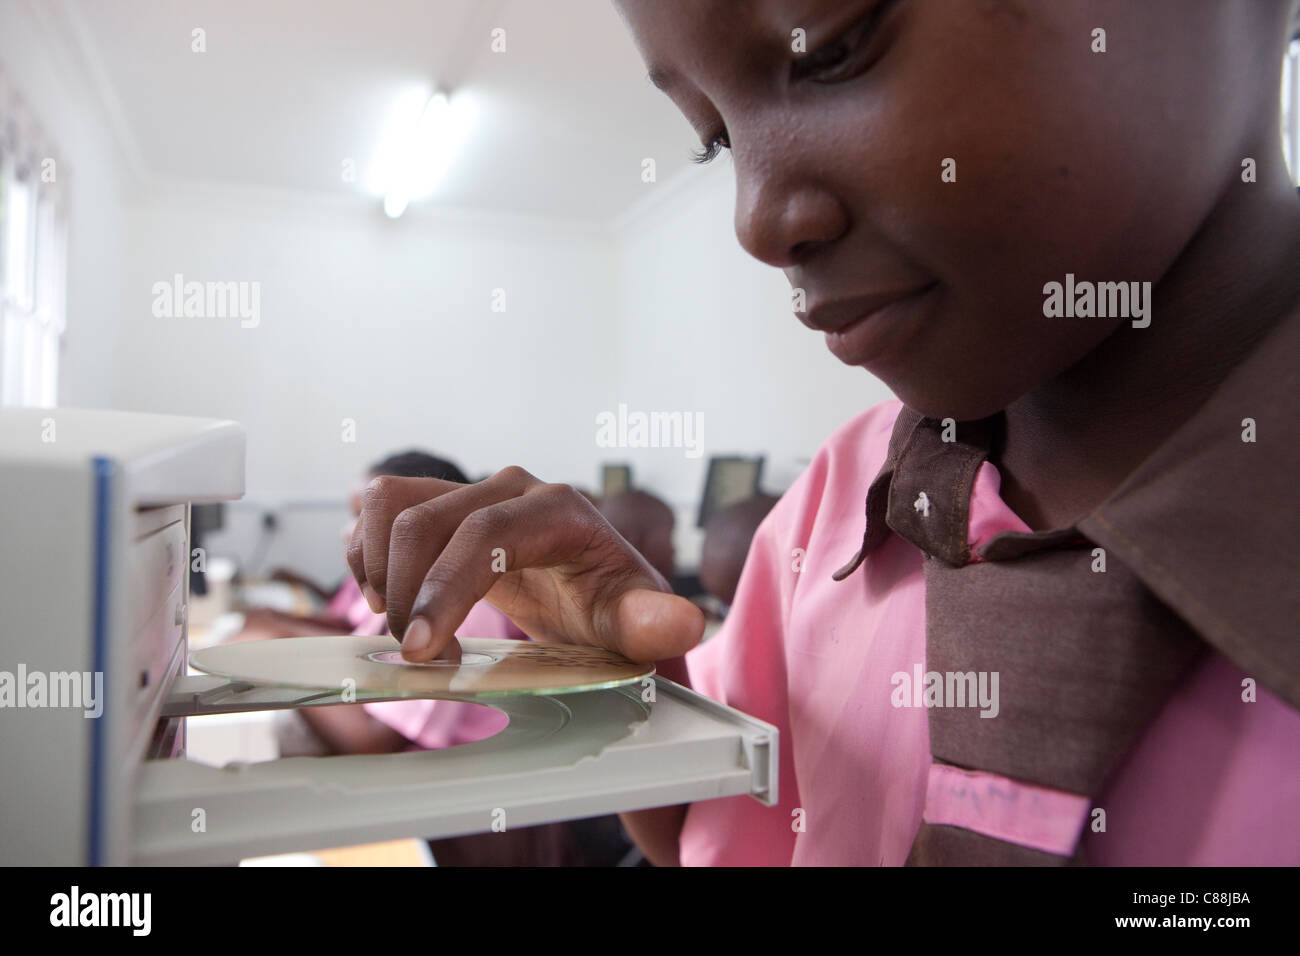 Students learn in a computer lab at a school in Dar es Salaam, Tanzania, East Africa. Stock Photo